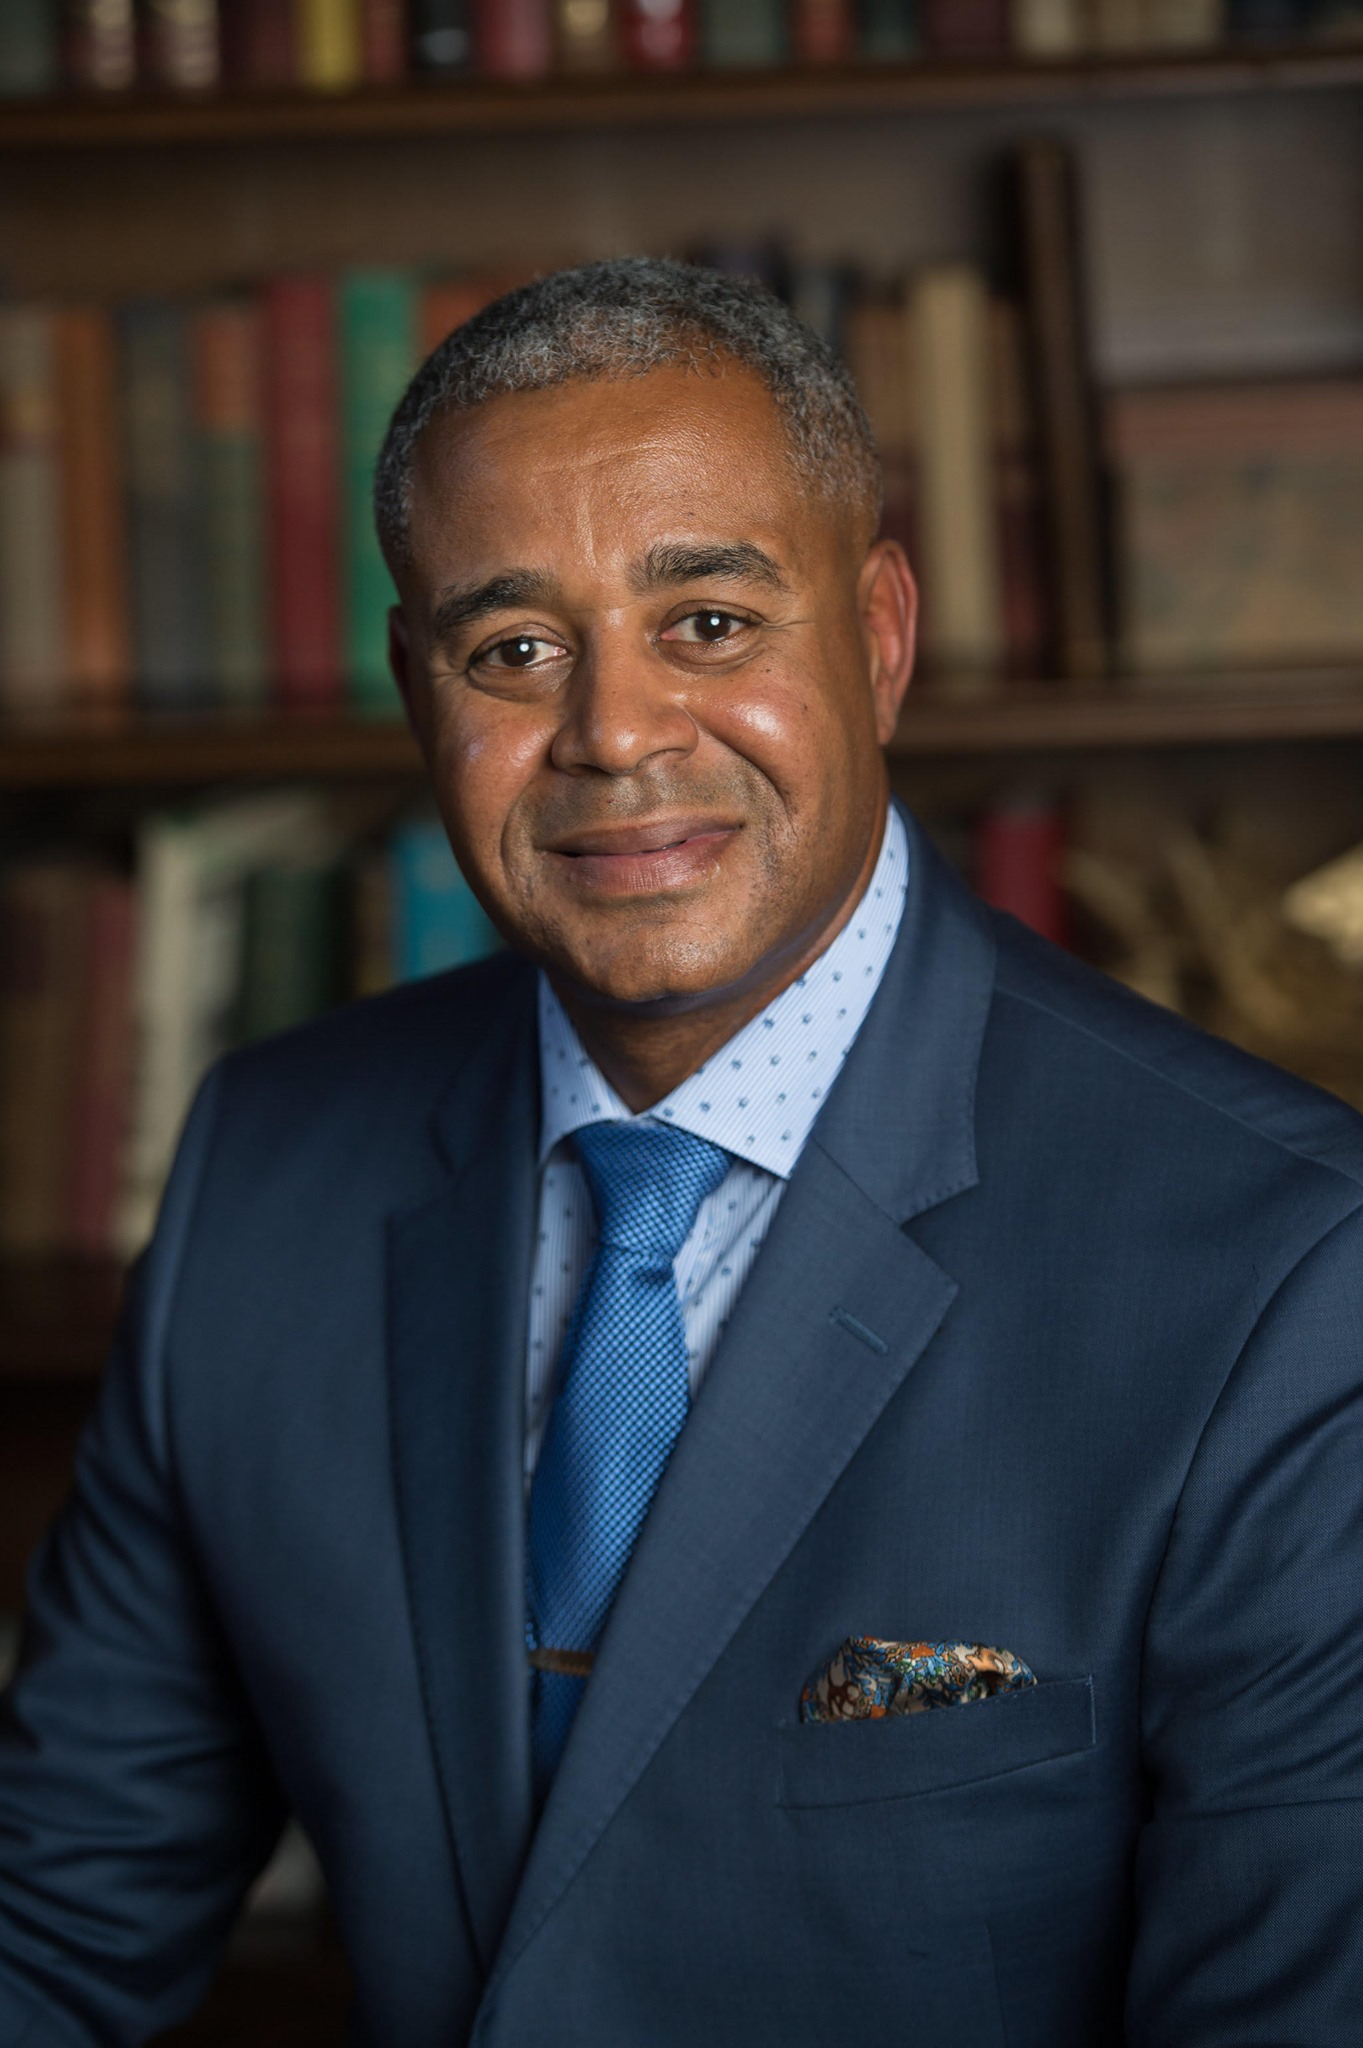 Lane Coleman, a Black man with graying hair wearing a blue suit and tie.